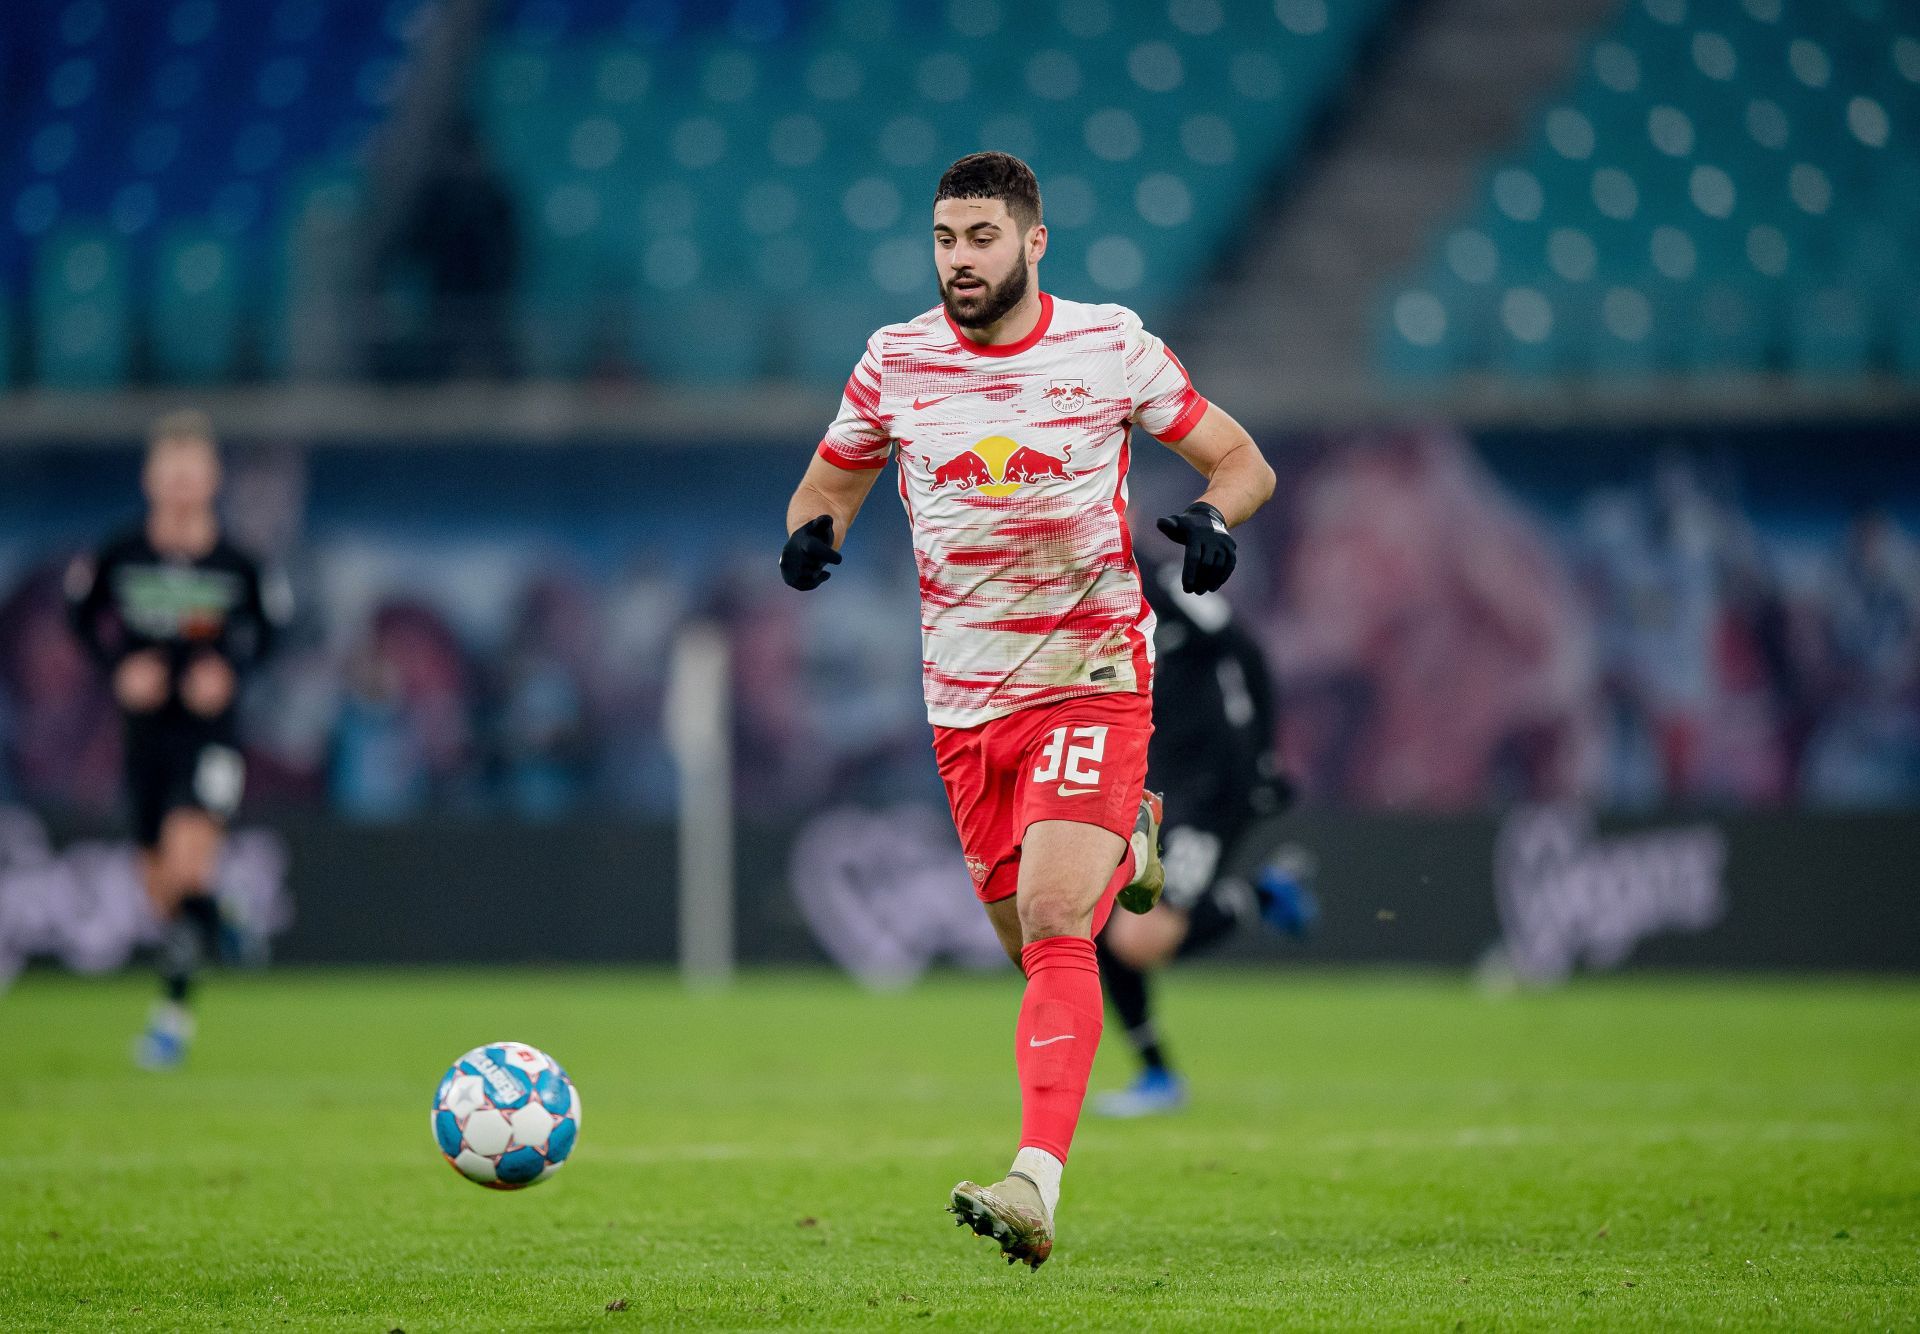 RB Leipzig face Mainz in their first game of 2022 on Saturday